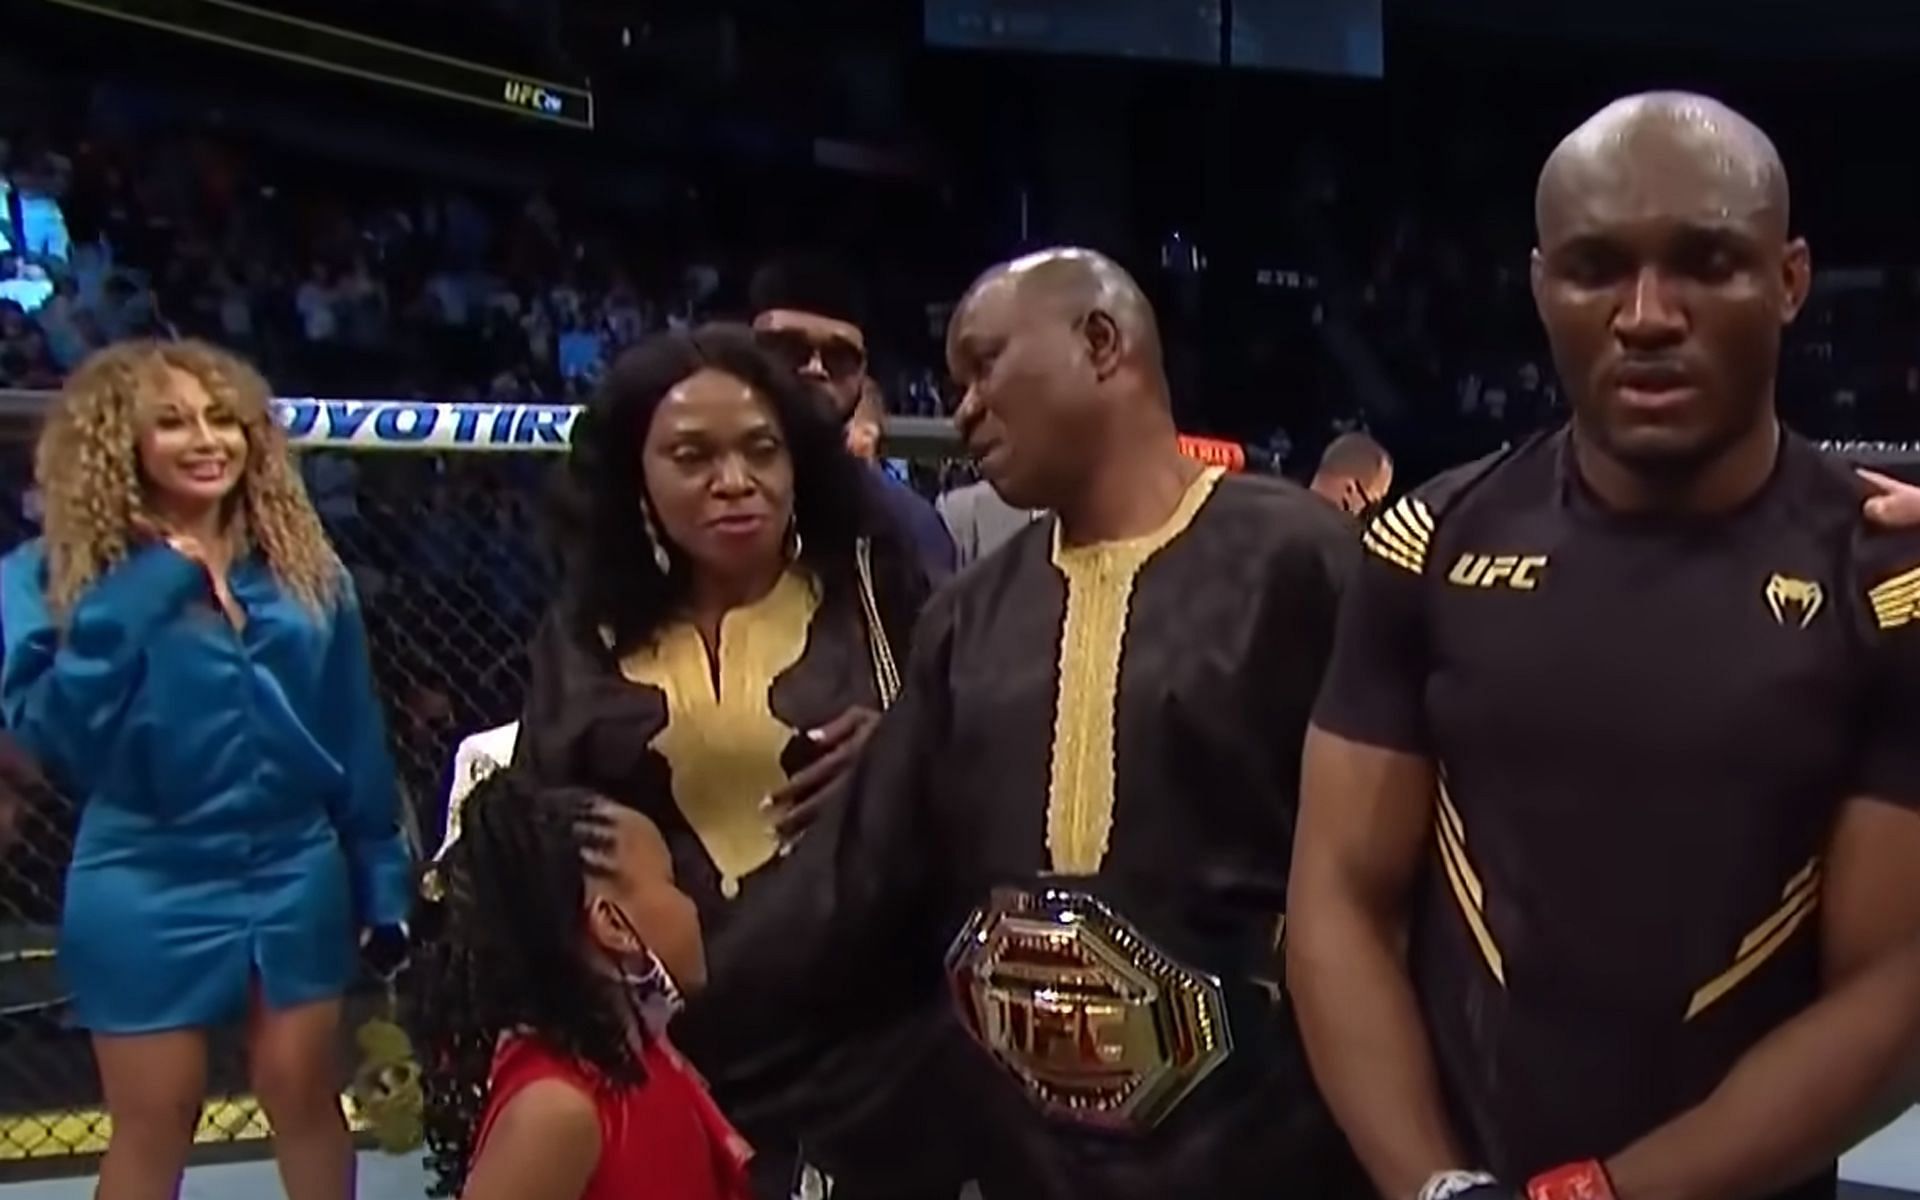 Kamaru Usman (extreme right) and his wife Eleslie Dietzsch (extreme left) (Image via UFC official YouTube channel)